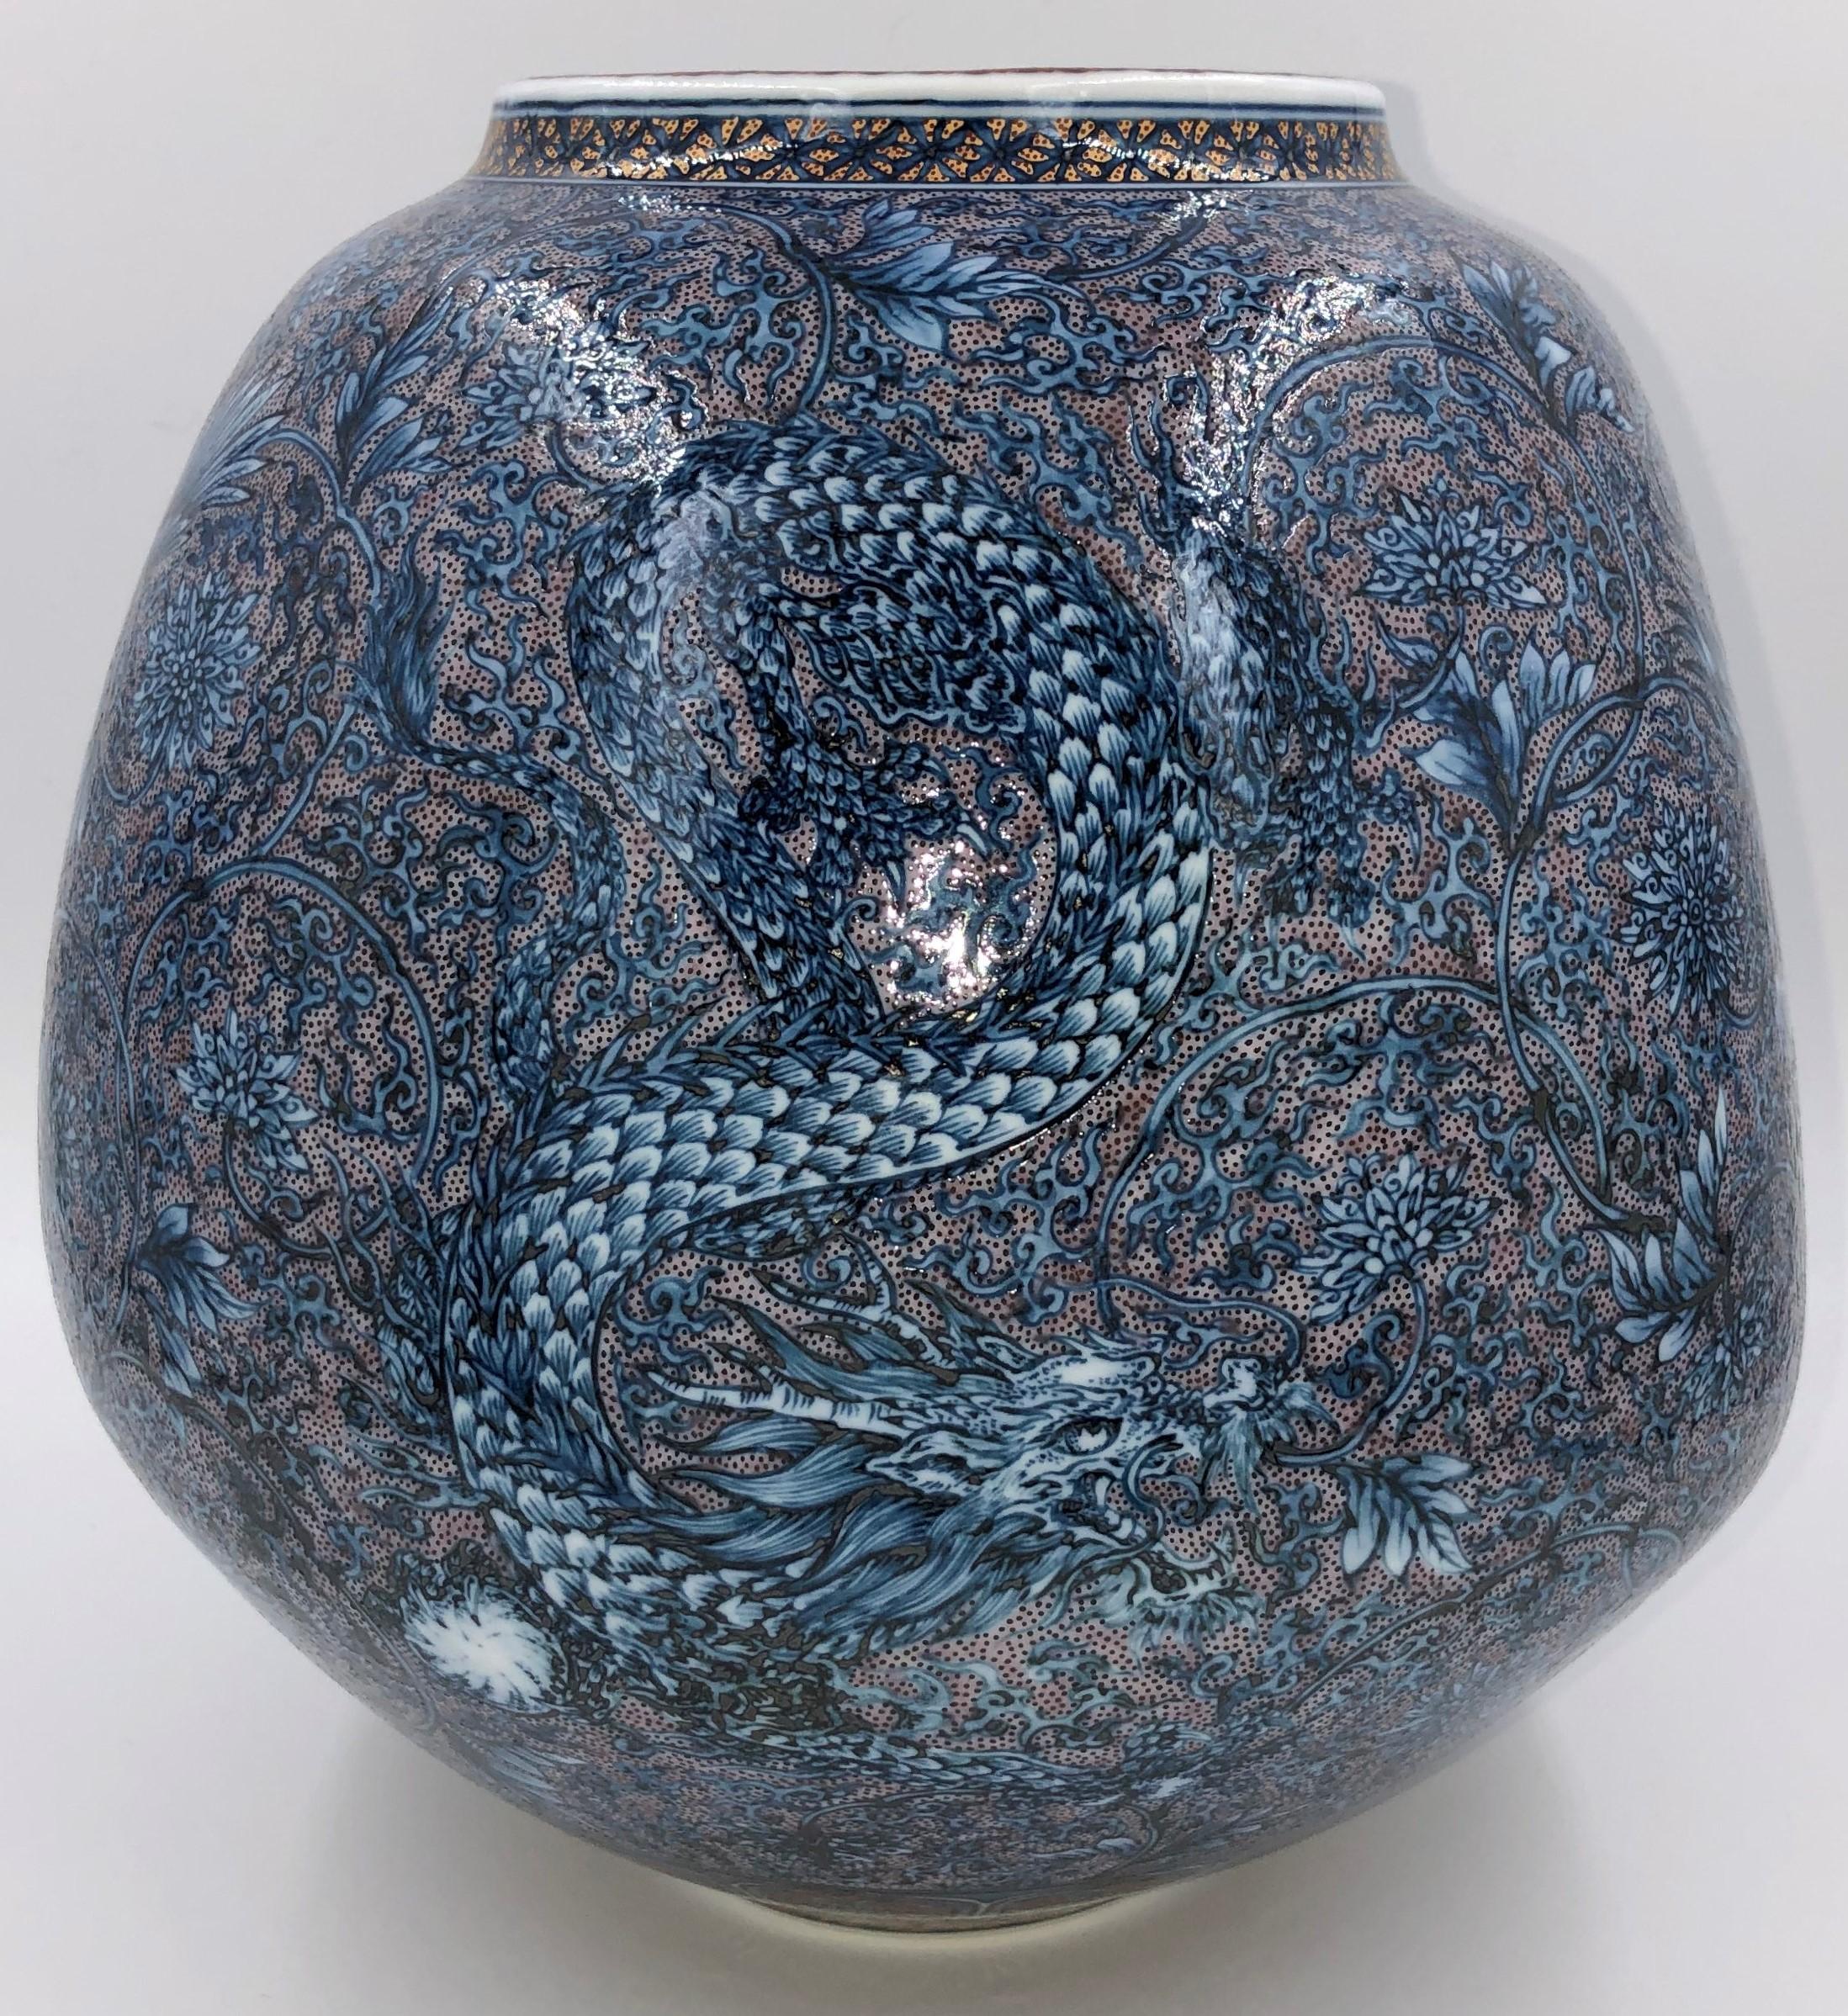 Hand-Painted Hand Painted Japanese Blue Porcelain Vase by Contemporary Master Artist Duo